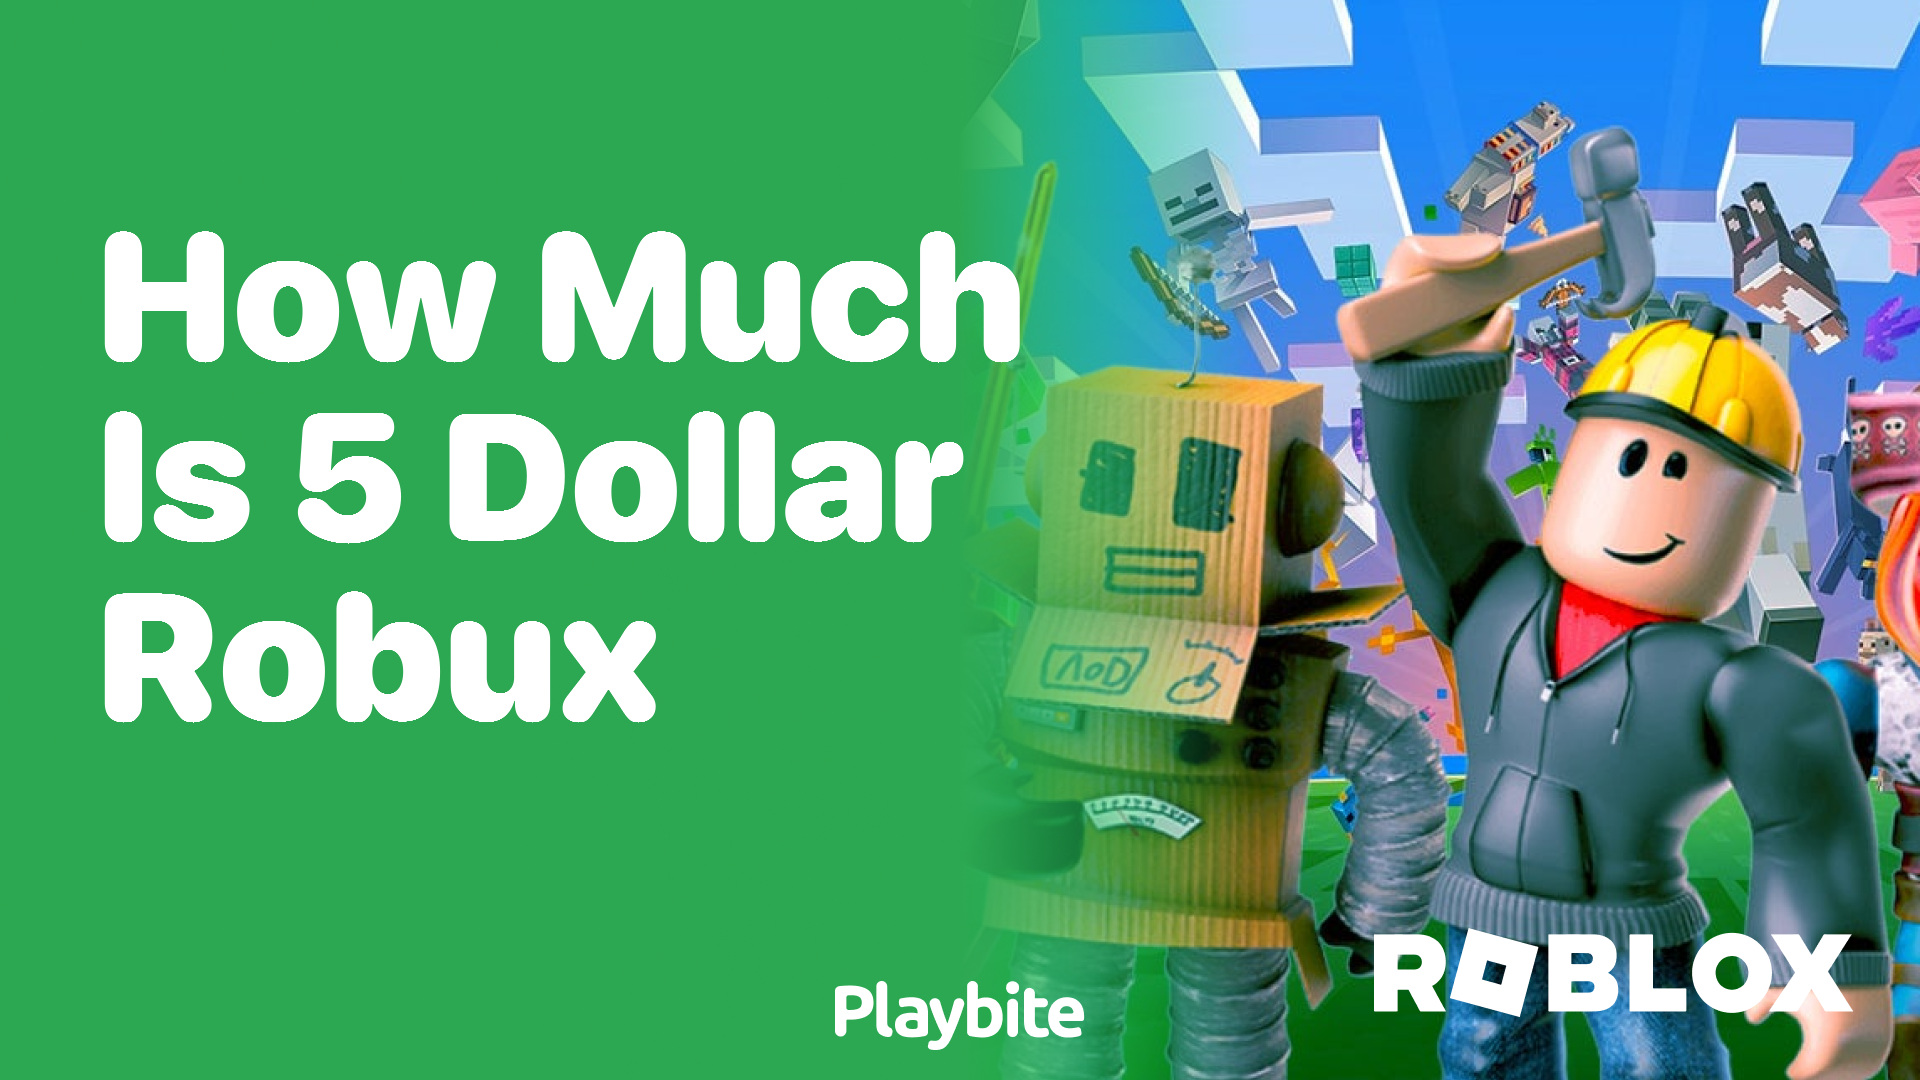 How Much is 5 Dollar Robux?